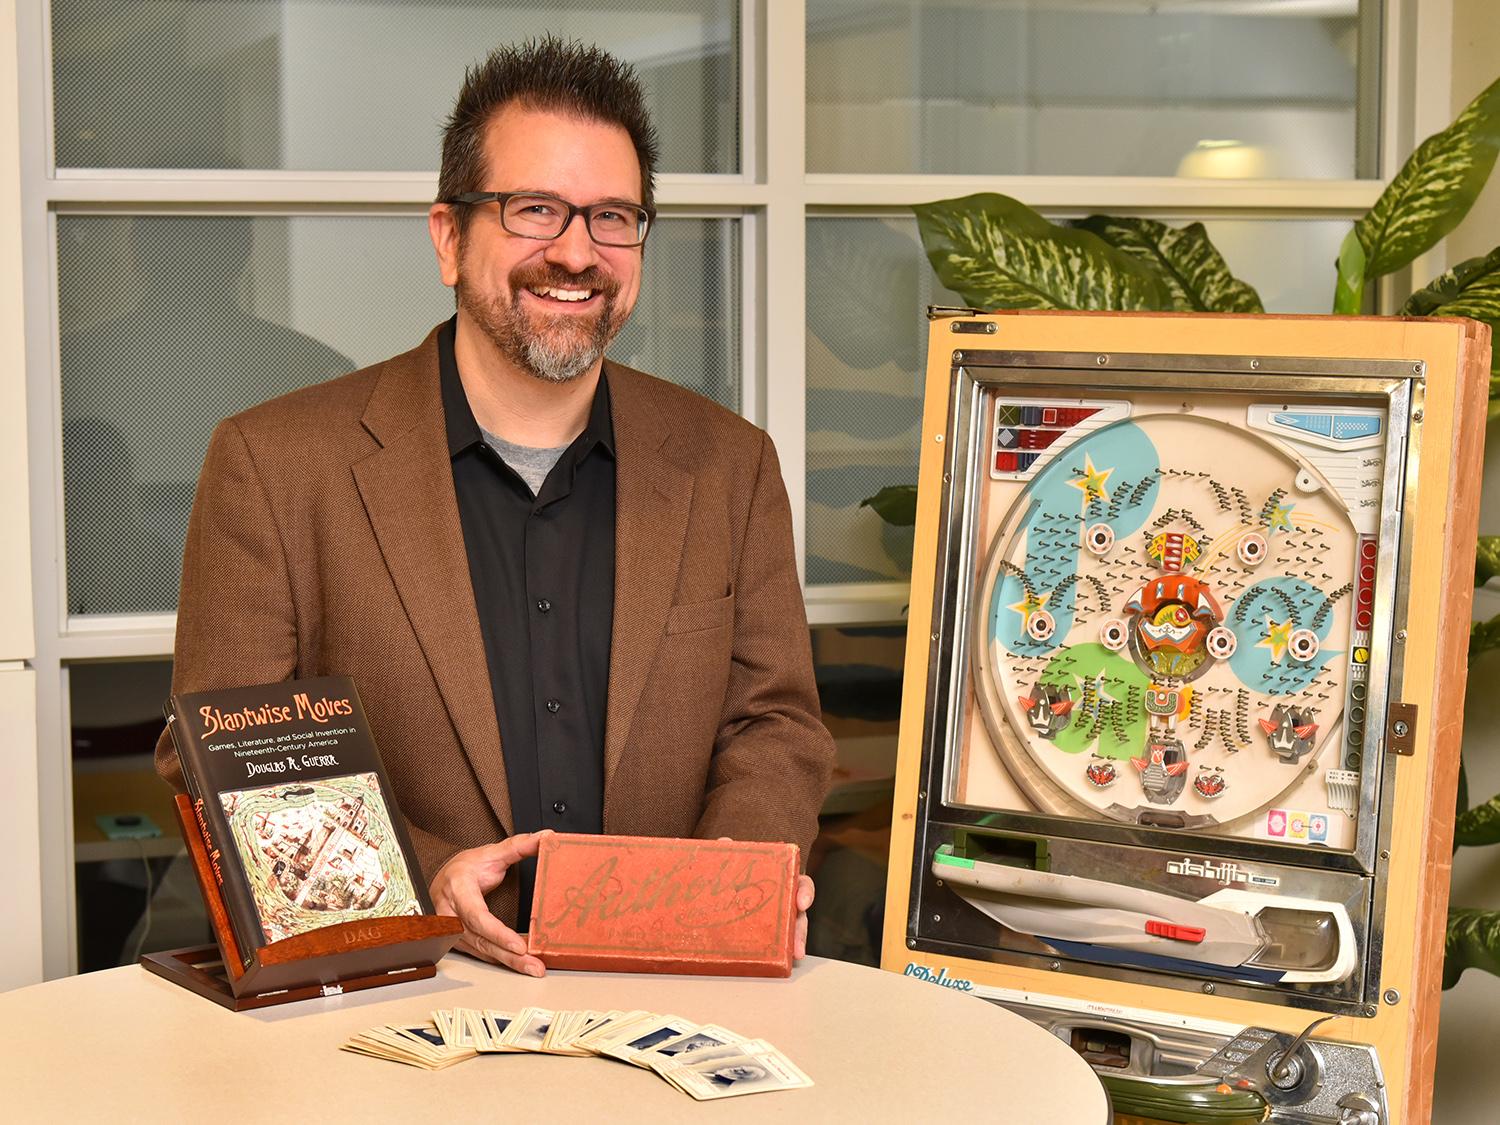 Douglas Guerra of SUNY Oswego’s English and creative writing faculty recently earned the Popular Culture Association’s Ray and Pat Browne Award for his book Slantwise Moves, which connects books, games and 19th-century social lives